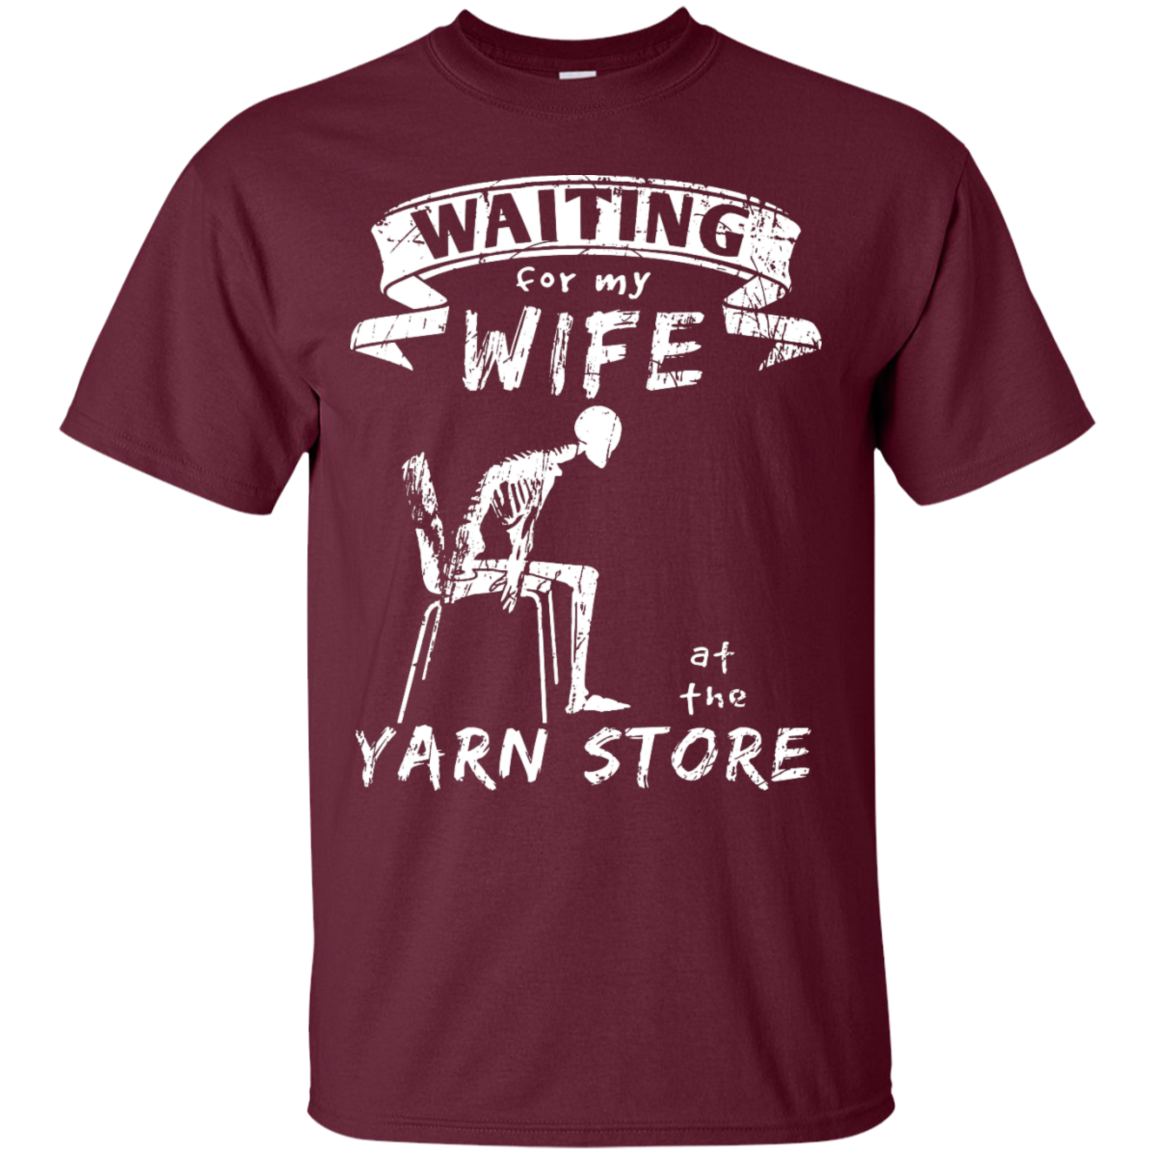 Waiting at the Yarn Store Men's and Unisex T-Shirts - Crafter4Life - 3